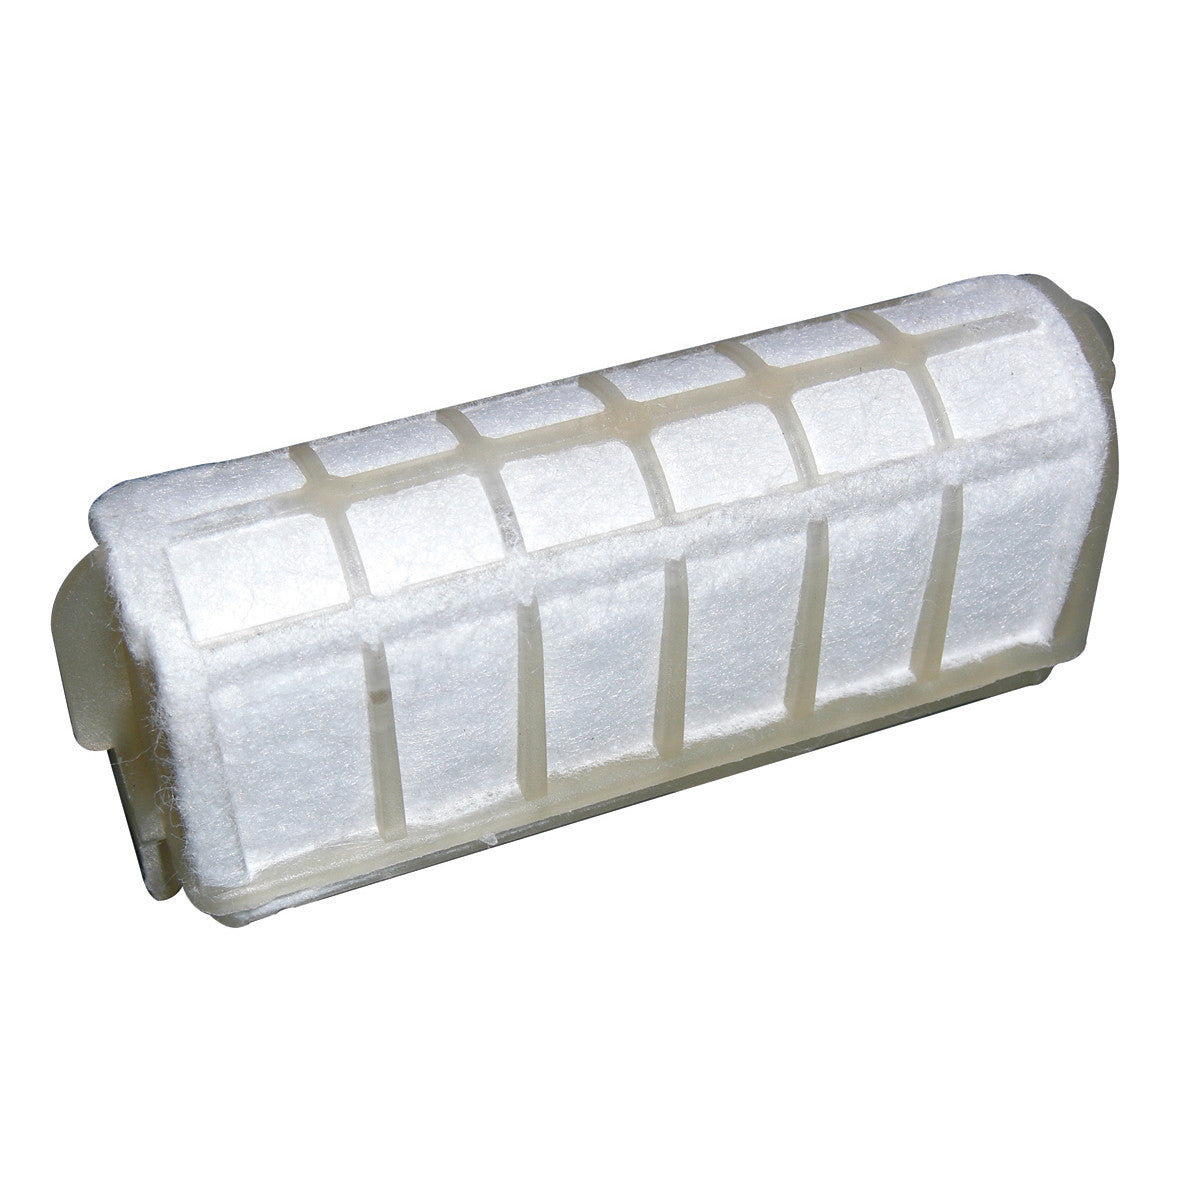 Stihl Chainsaw MS230/MS250/021/023/025/210/230/250/MS210 Filter-A/C Cartridge 1123 120 1613